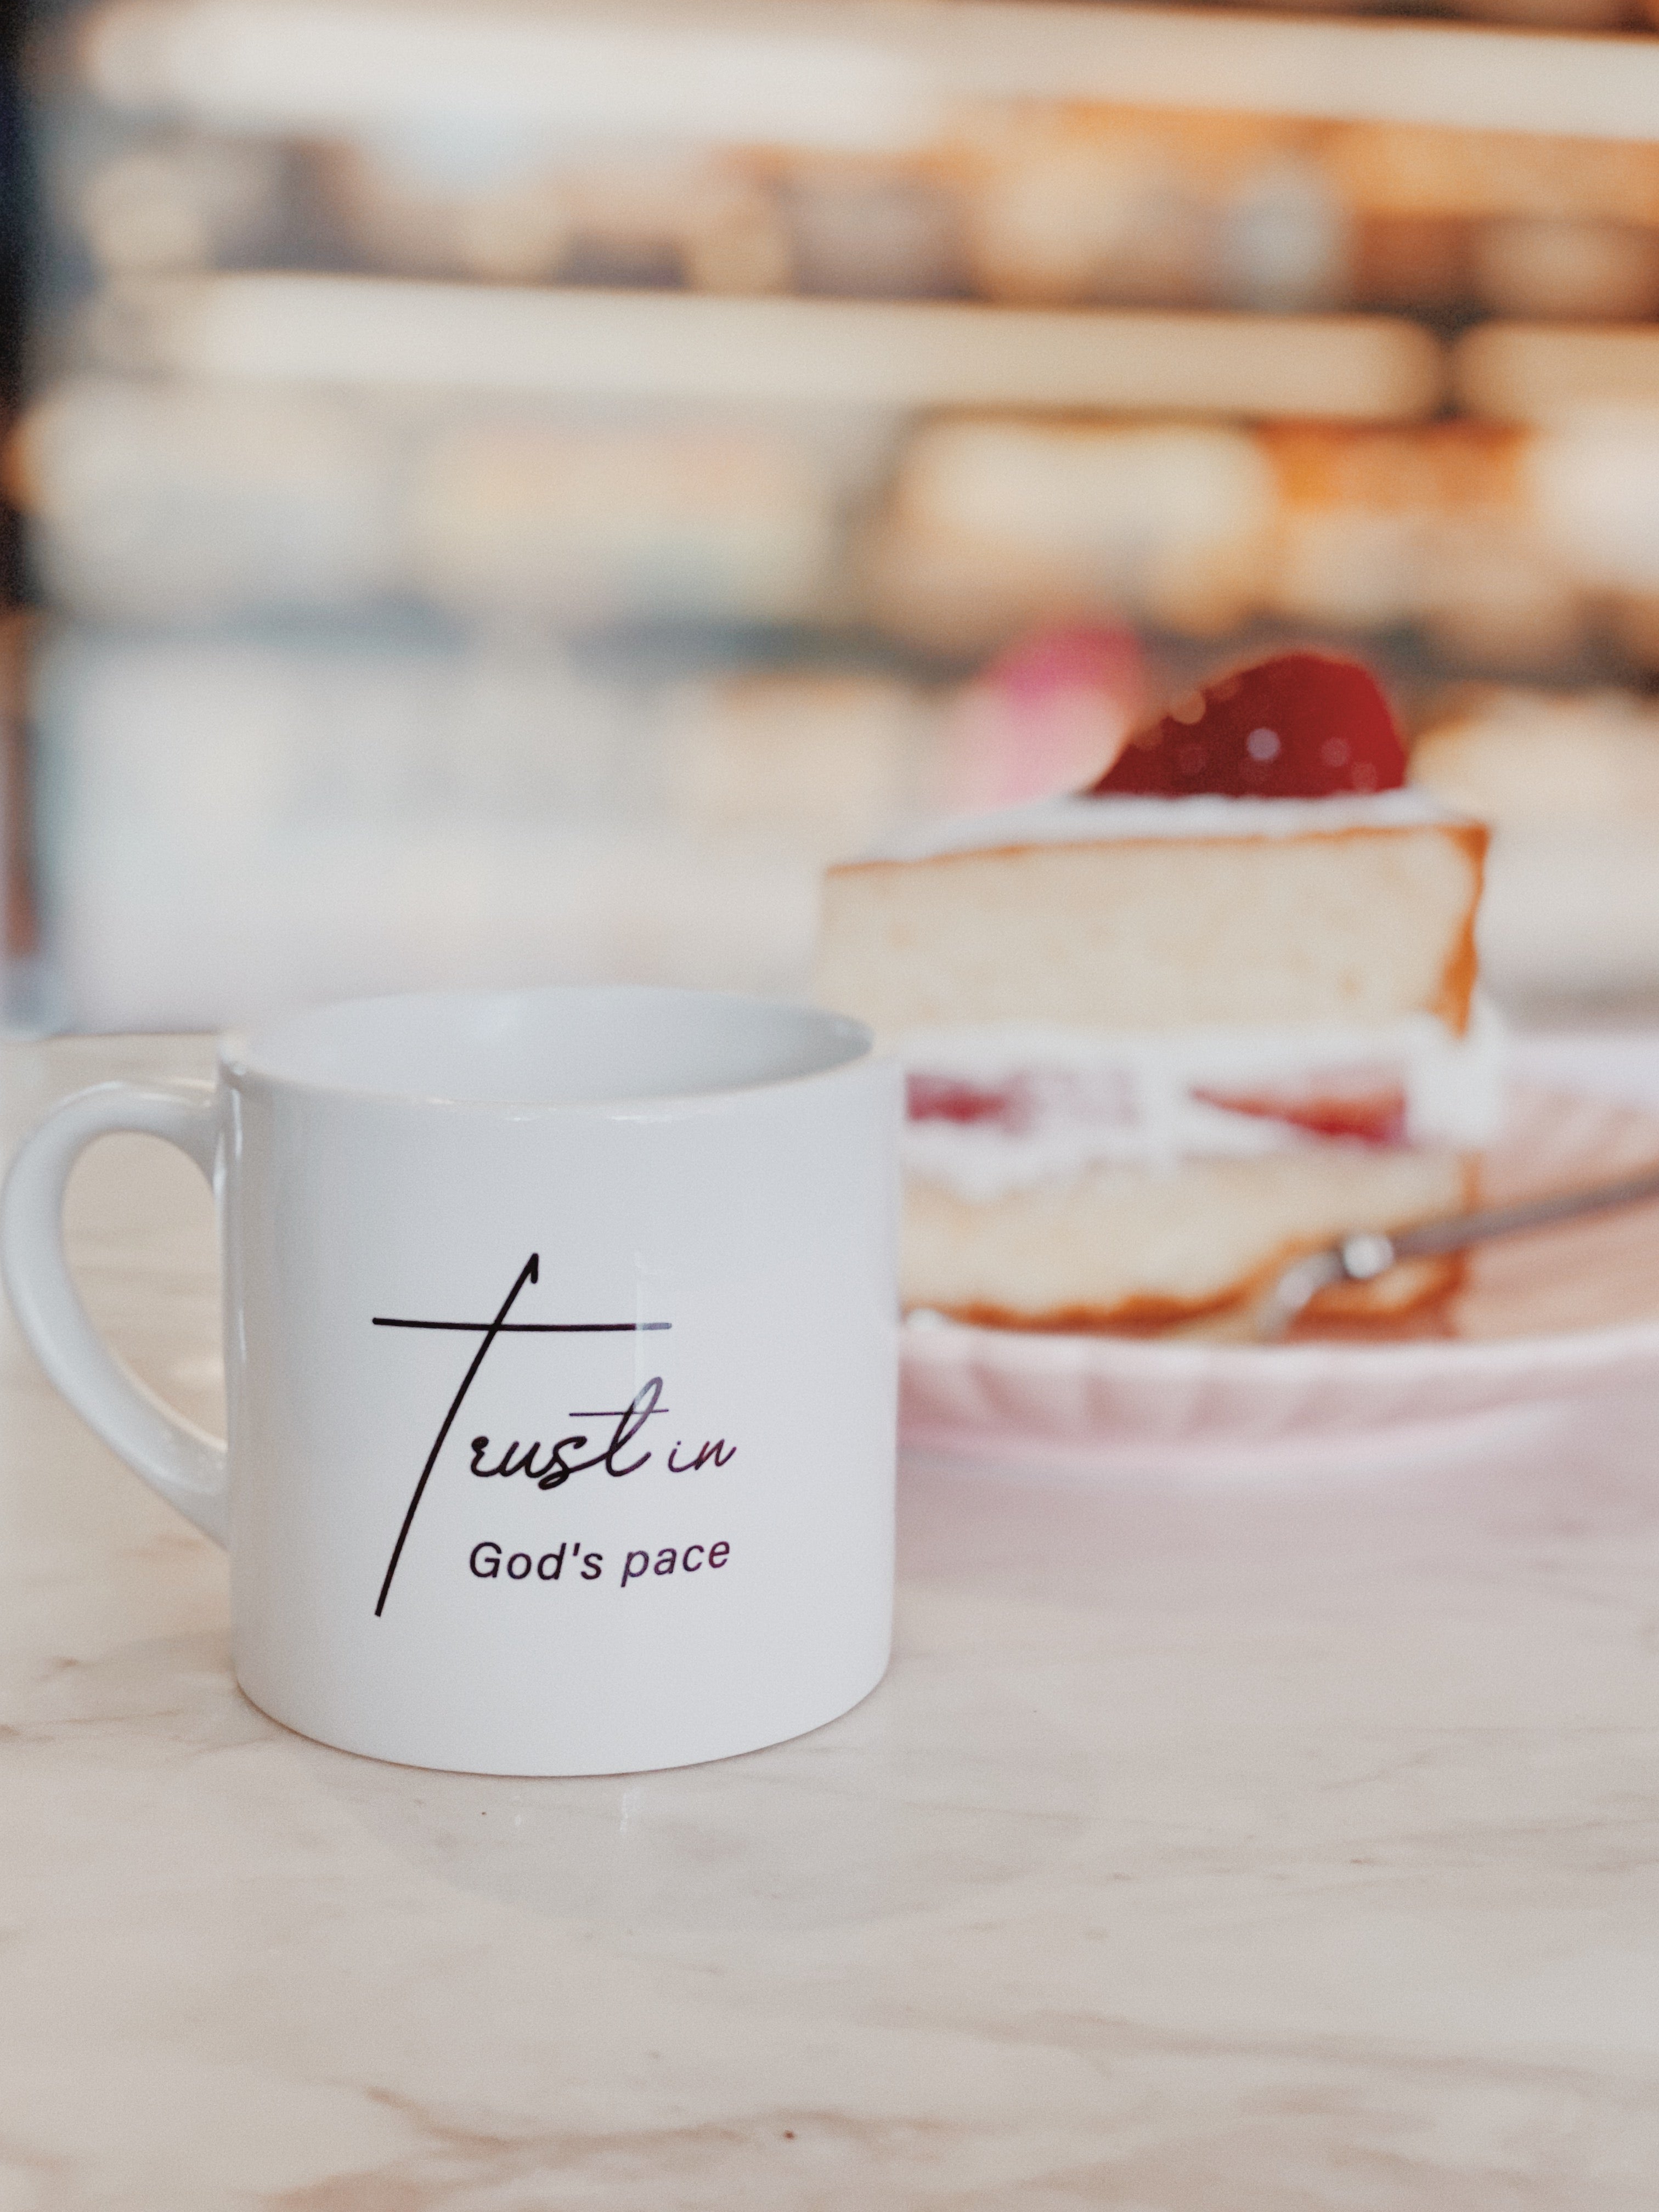 Christian Home Lookbook: Trust in God’s Pace Christian Coffee Mug on Dessert Table | Cute Small Christian Gifts Singapore